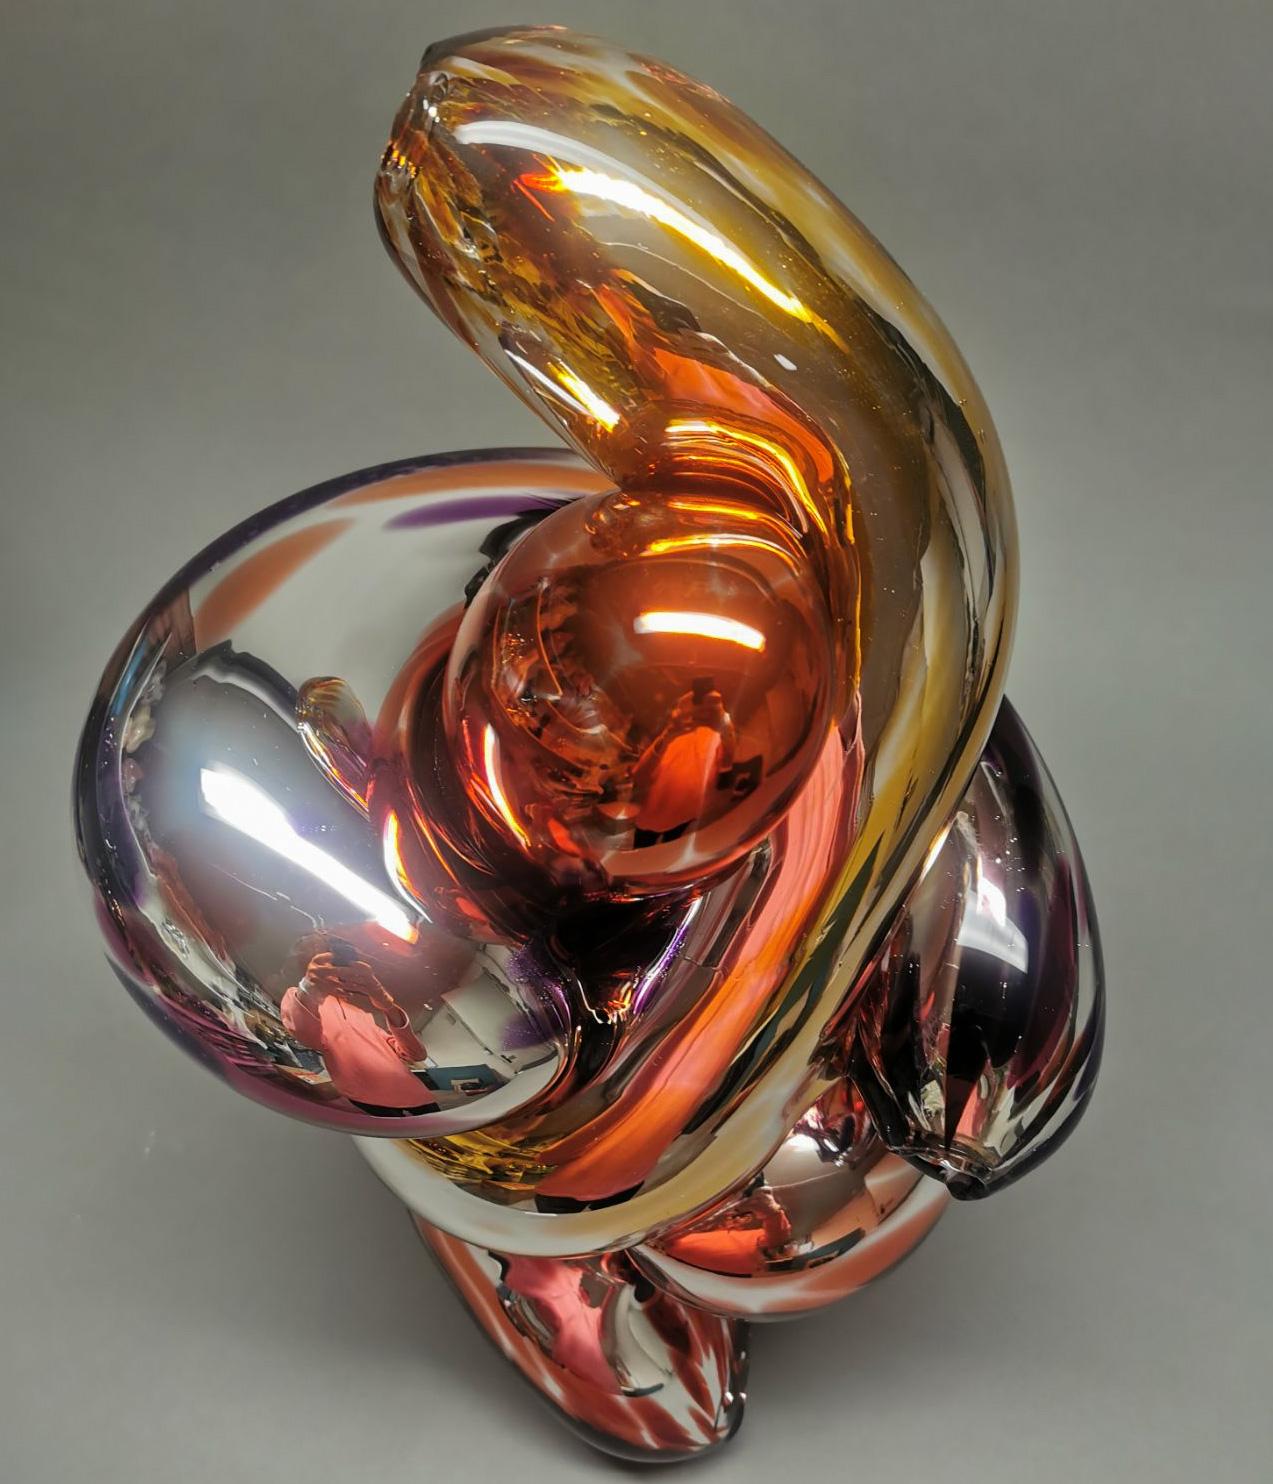 Contemporary Abstract, Mirrored Glass Sculpture by Markus Emilsson, In Stock For Sale